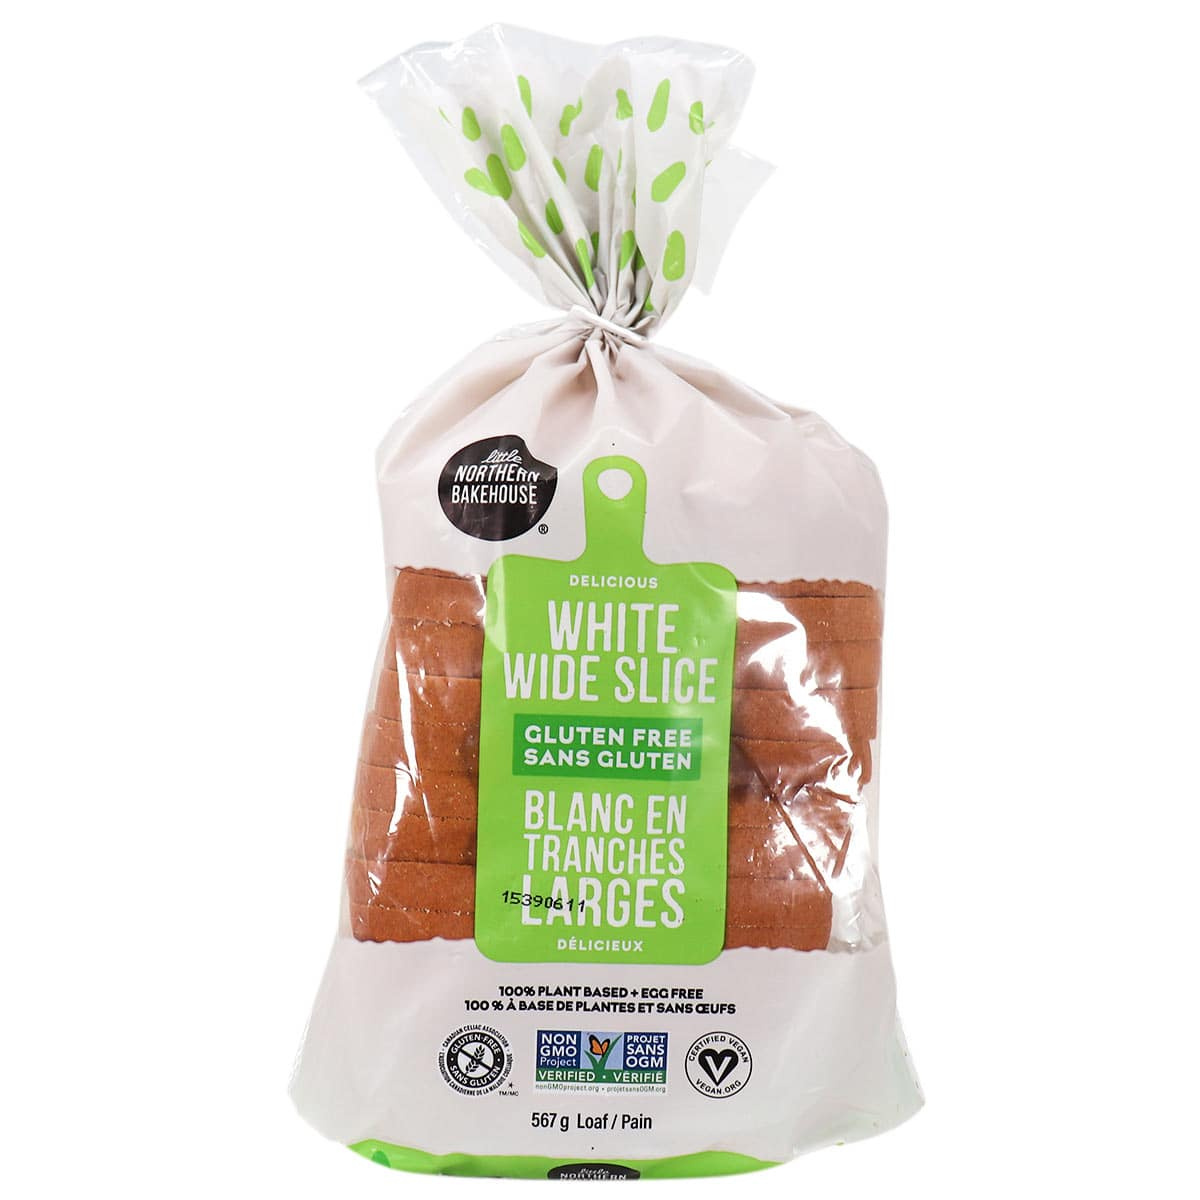 Little Northern Bakehouse White Bread at Natura Market